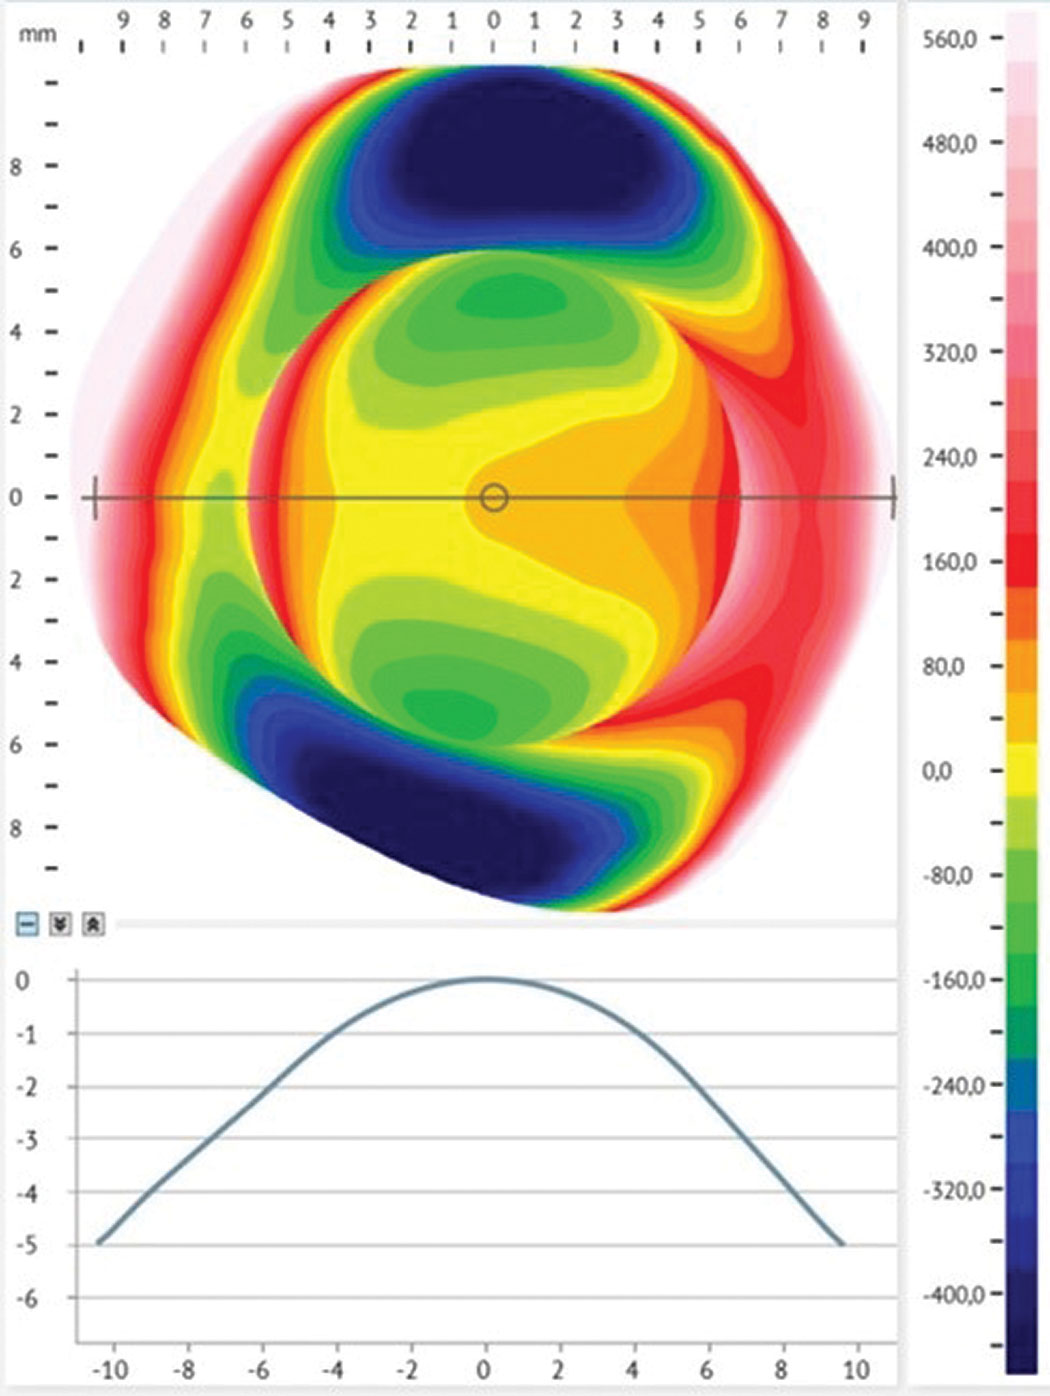 Fig 1. Profilometry of the conjunctiva shows irregular toricity of more than 450 um.